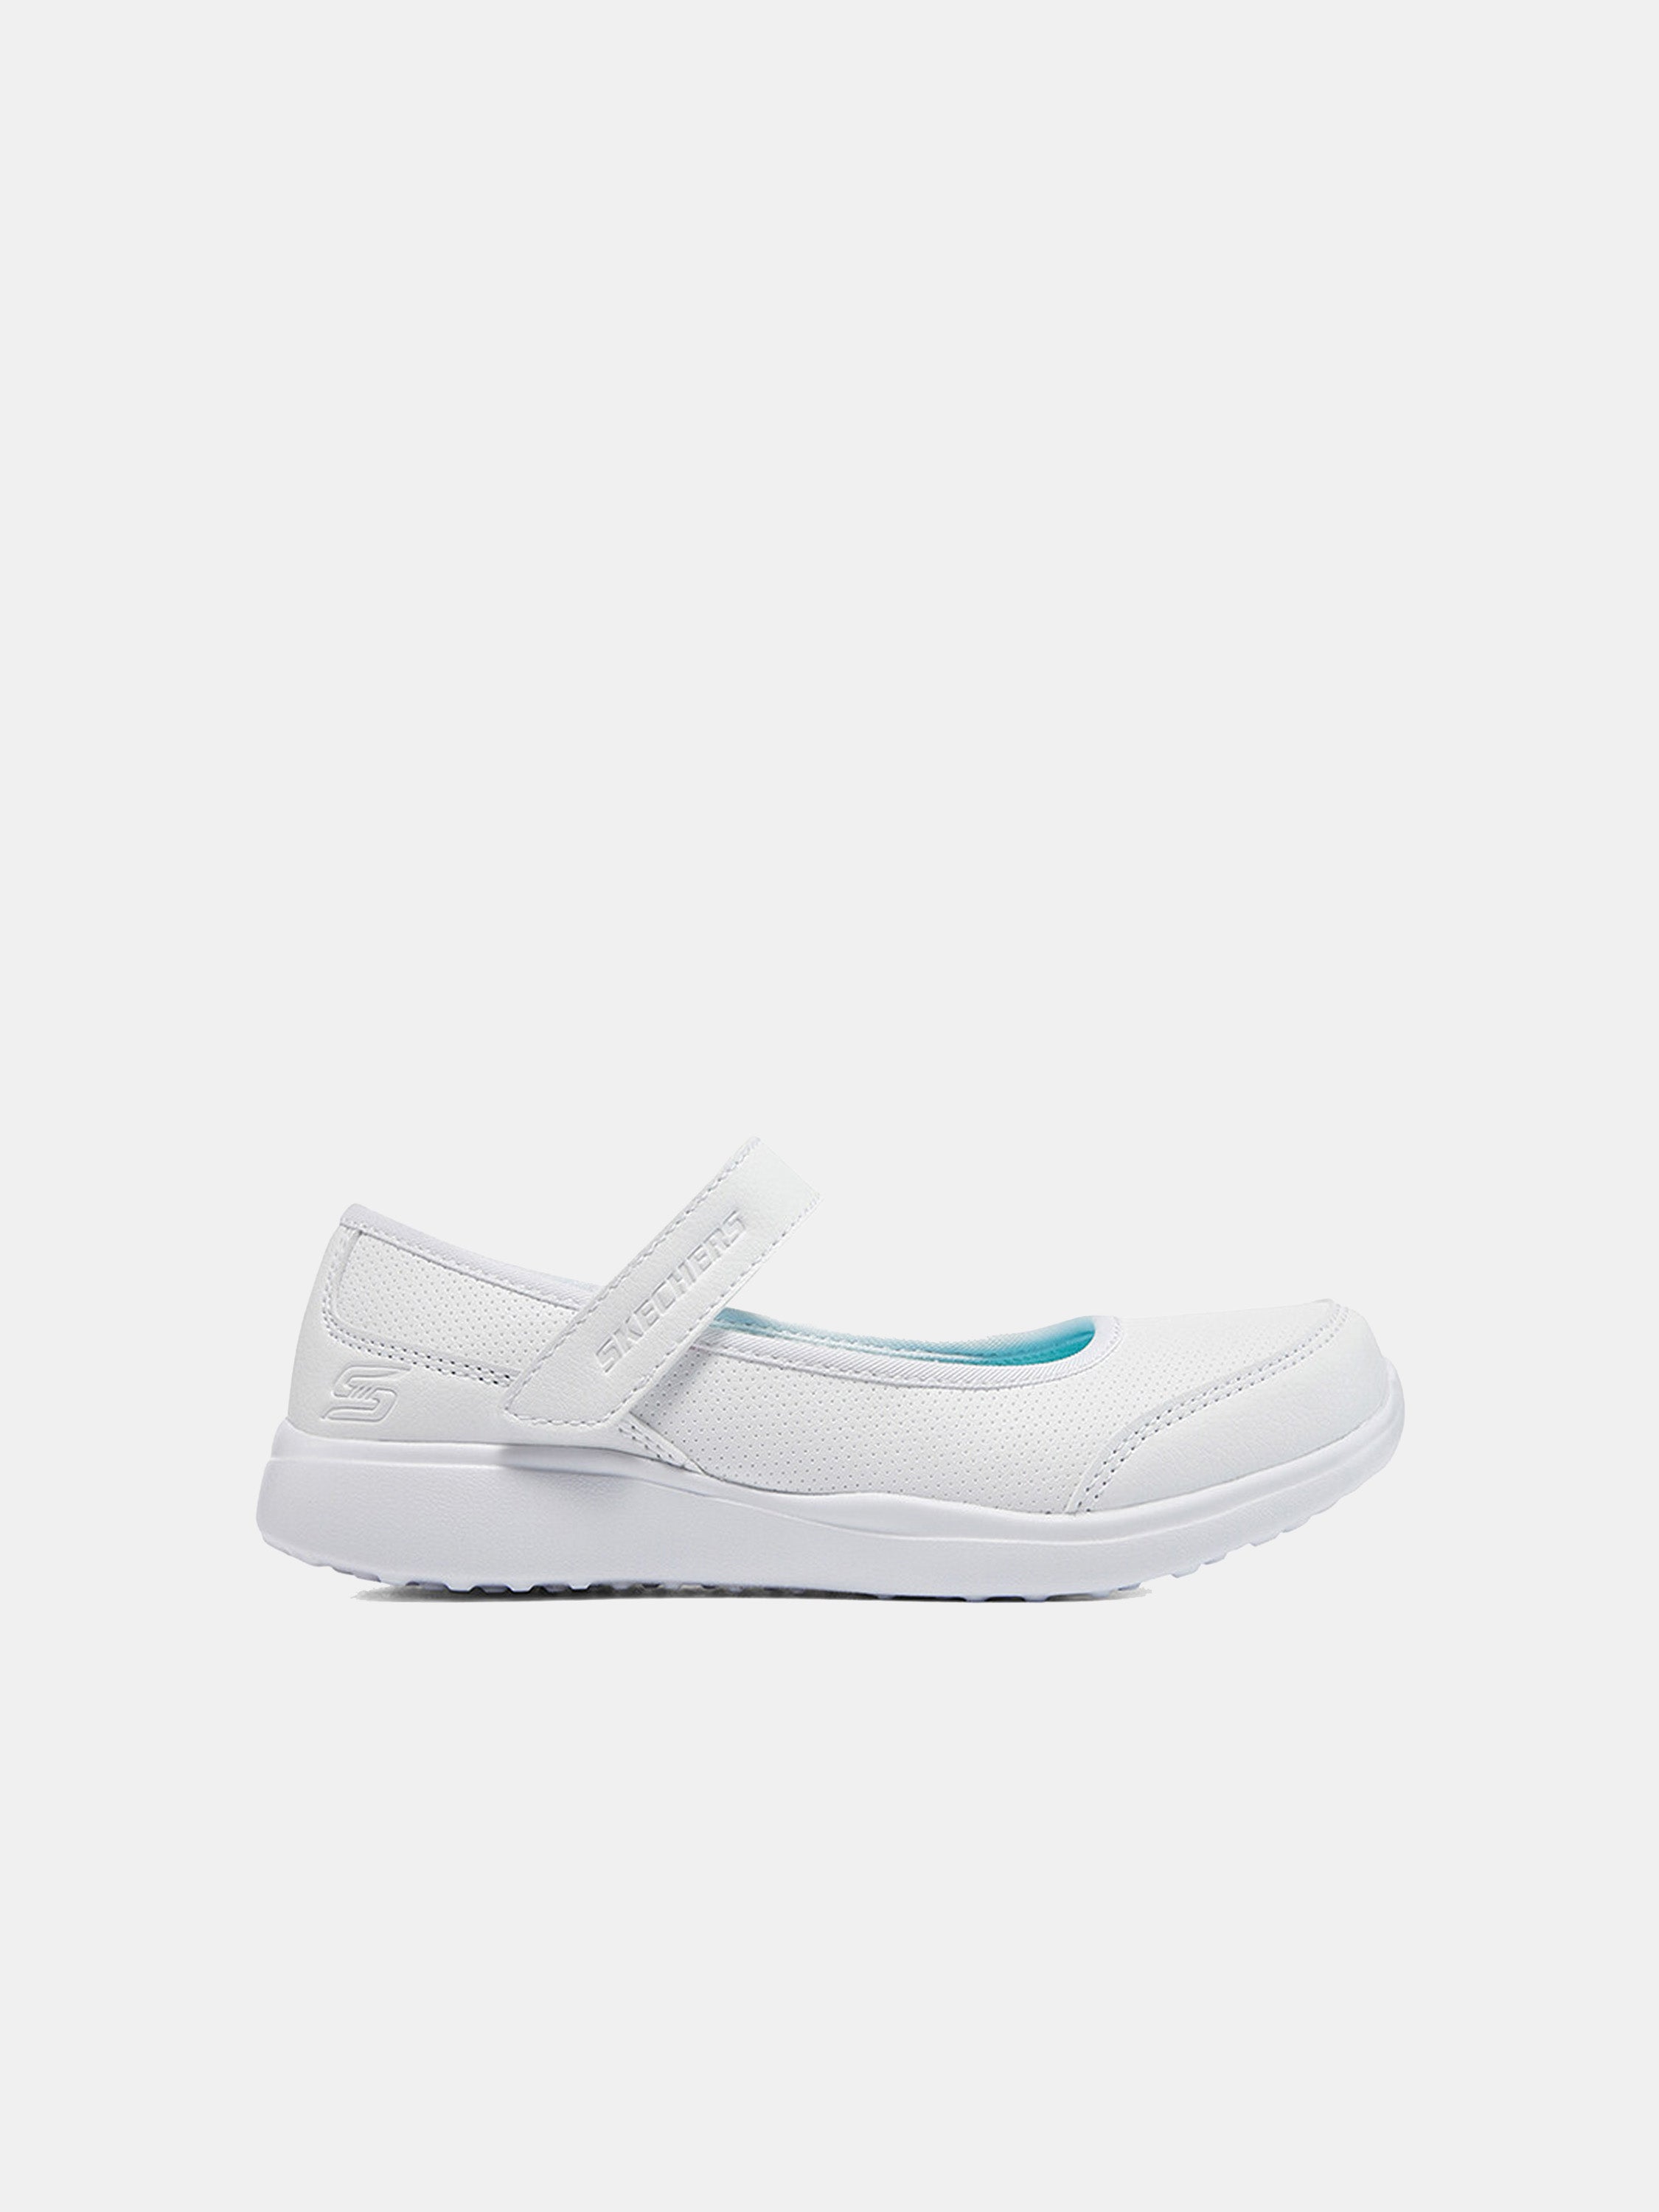 Skechers Girls Microstrides - Class Spirit School Shoes #color_White